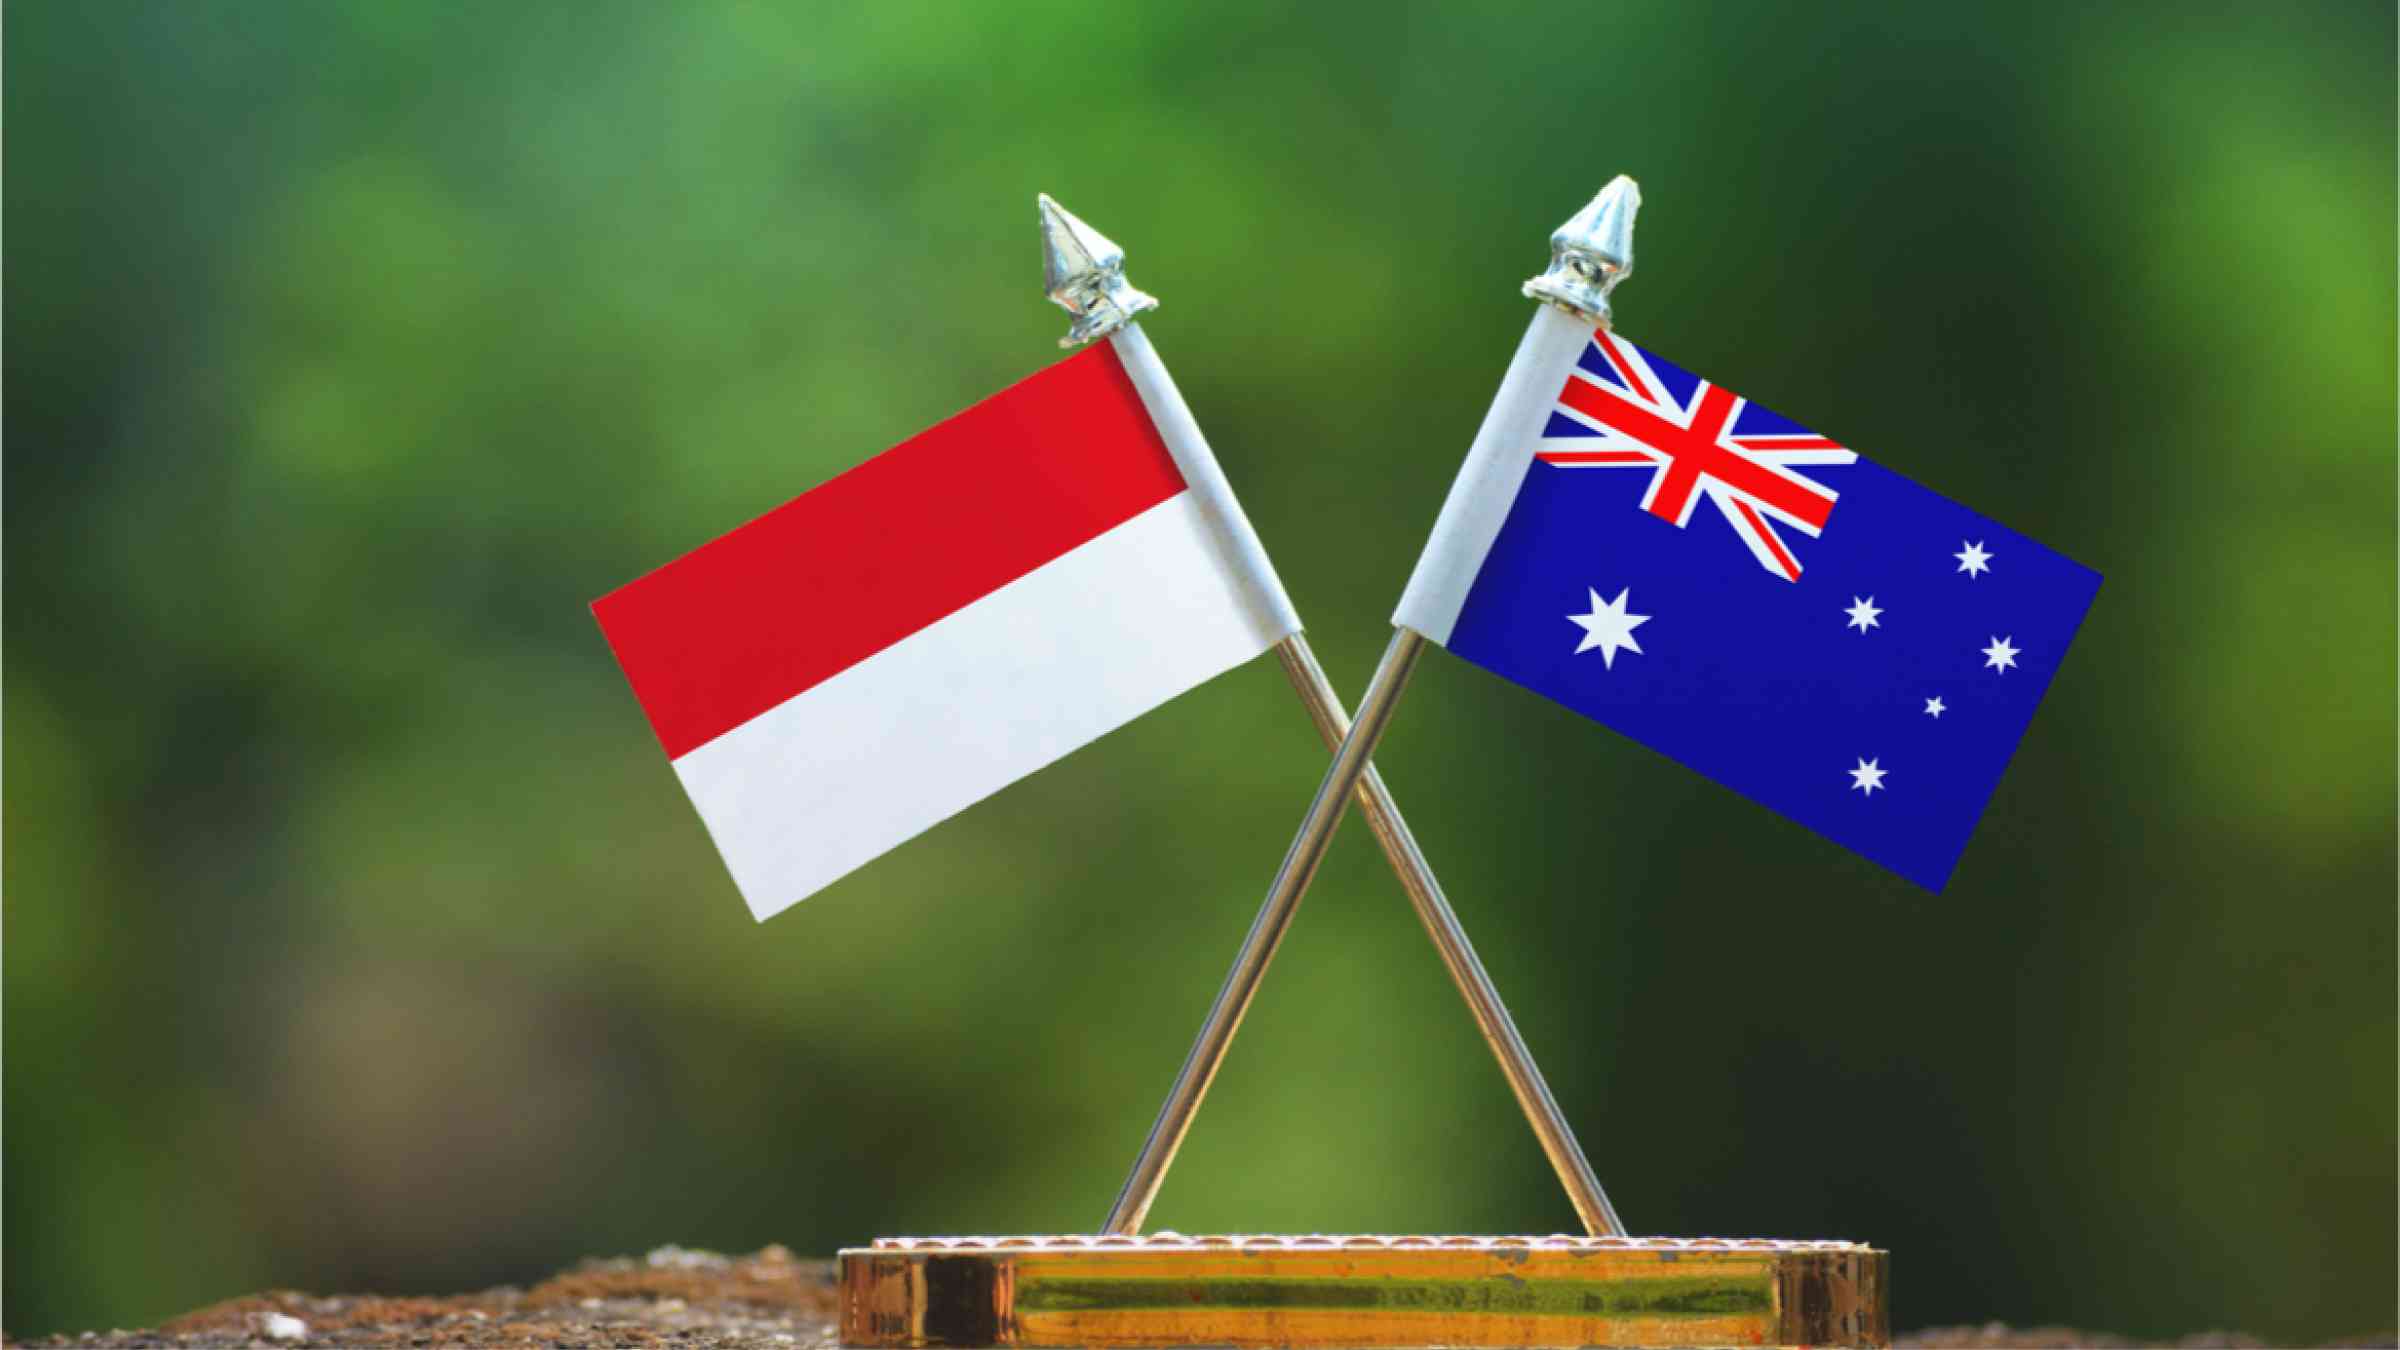 This image shows the two flags of Australia and Indonesia next to each other in front of blurred green nature.